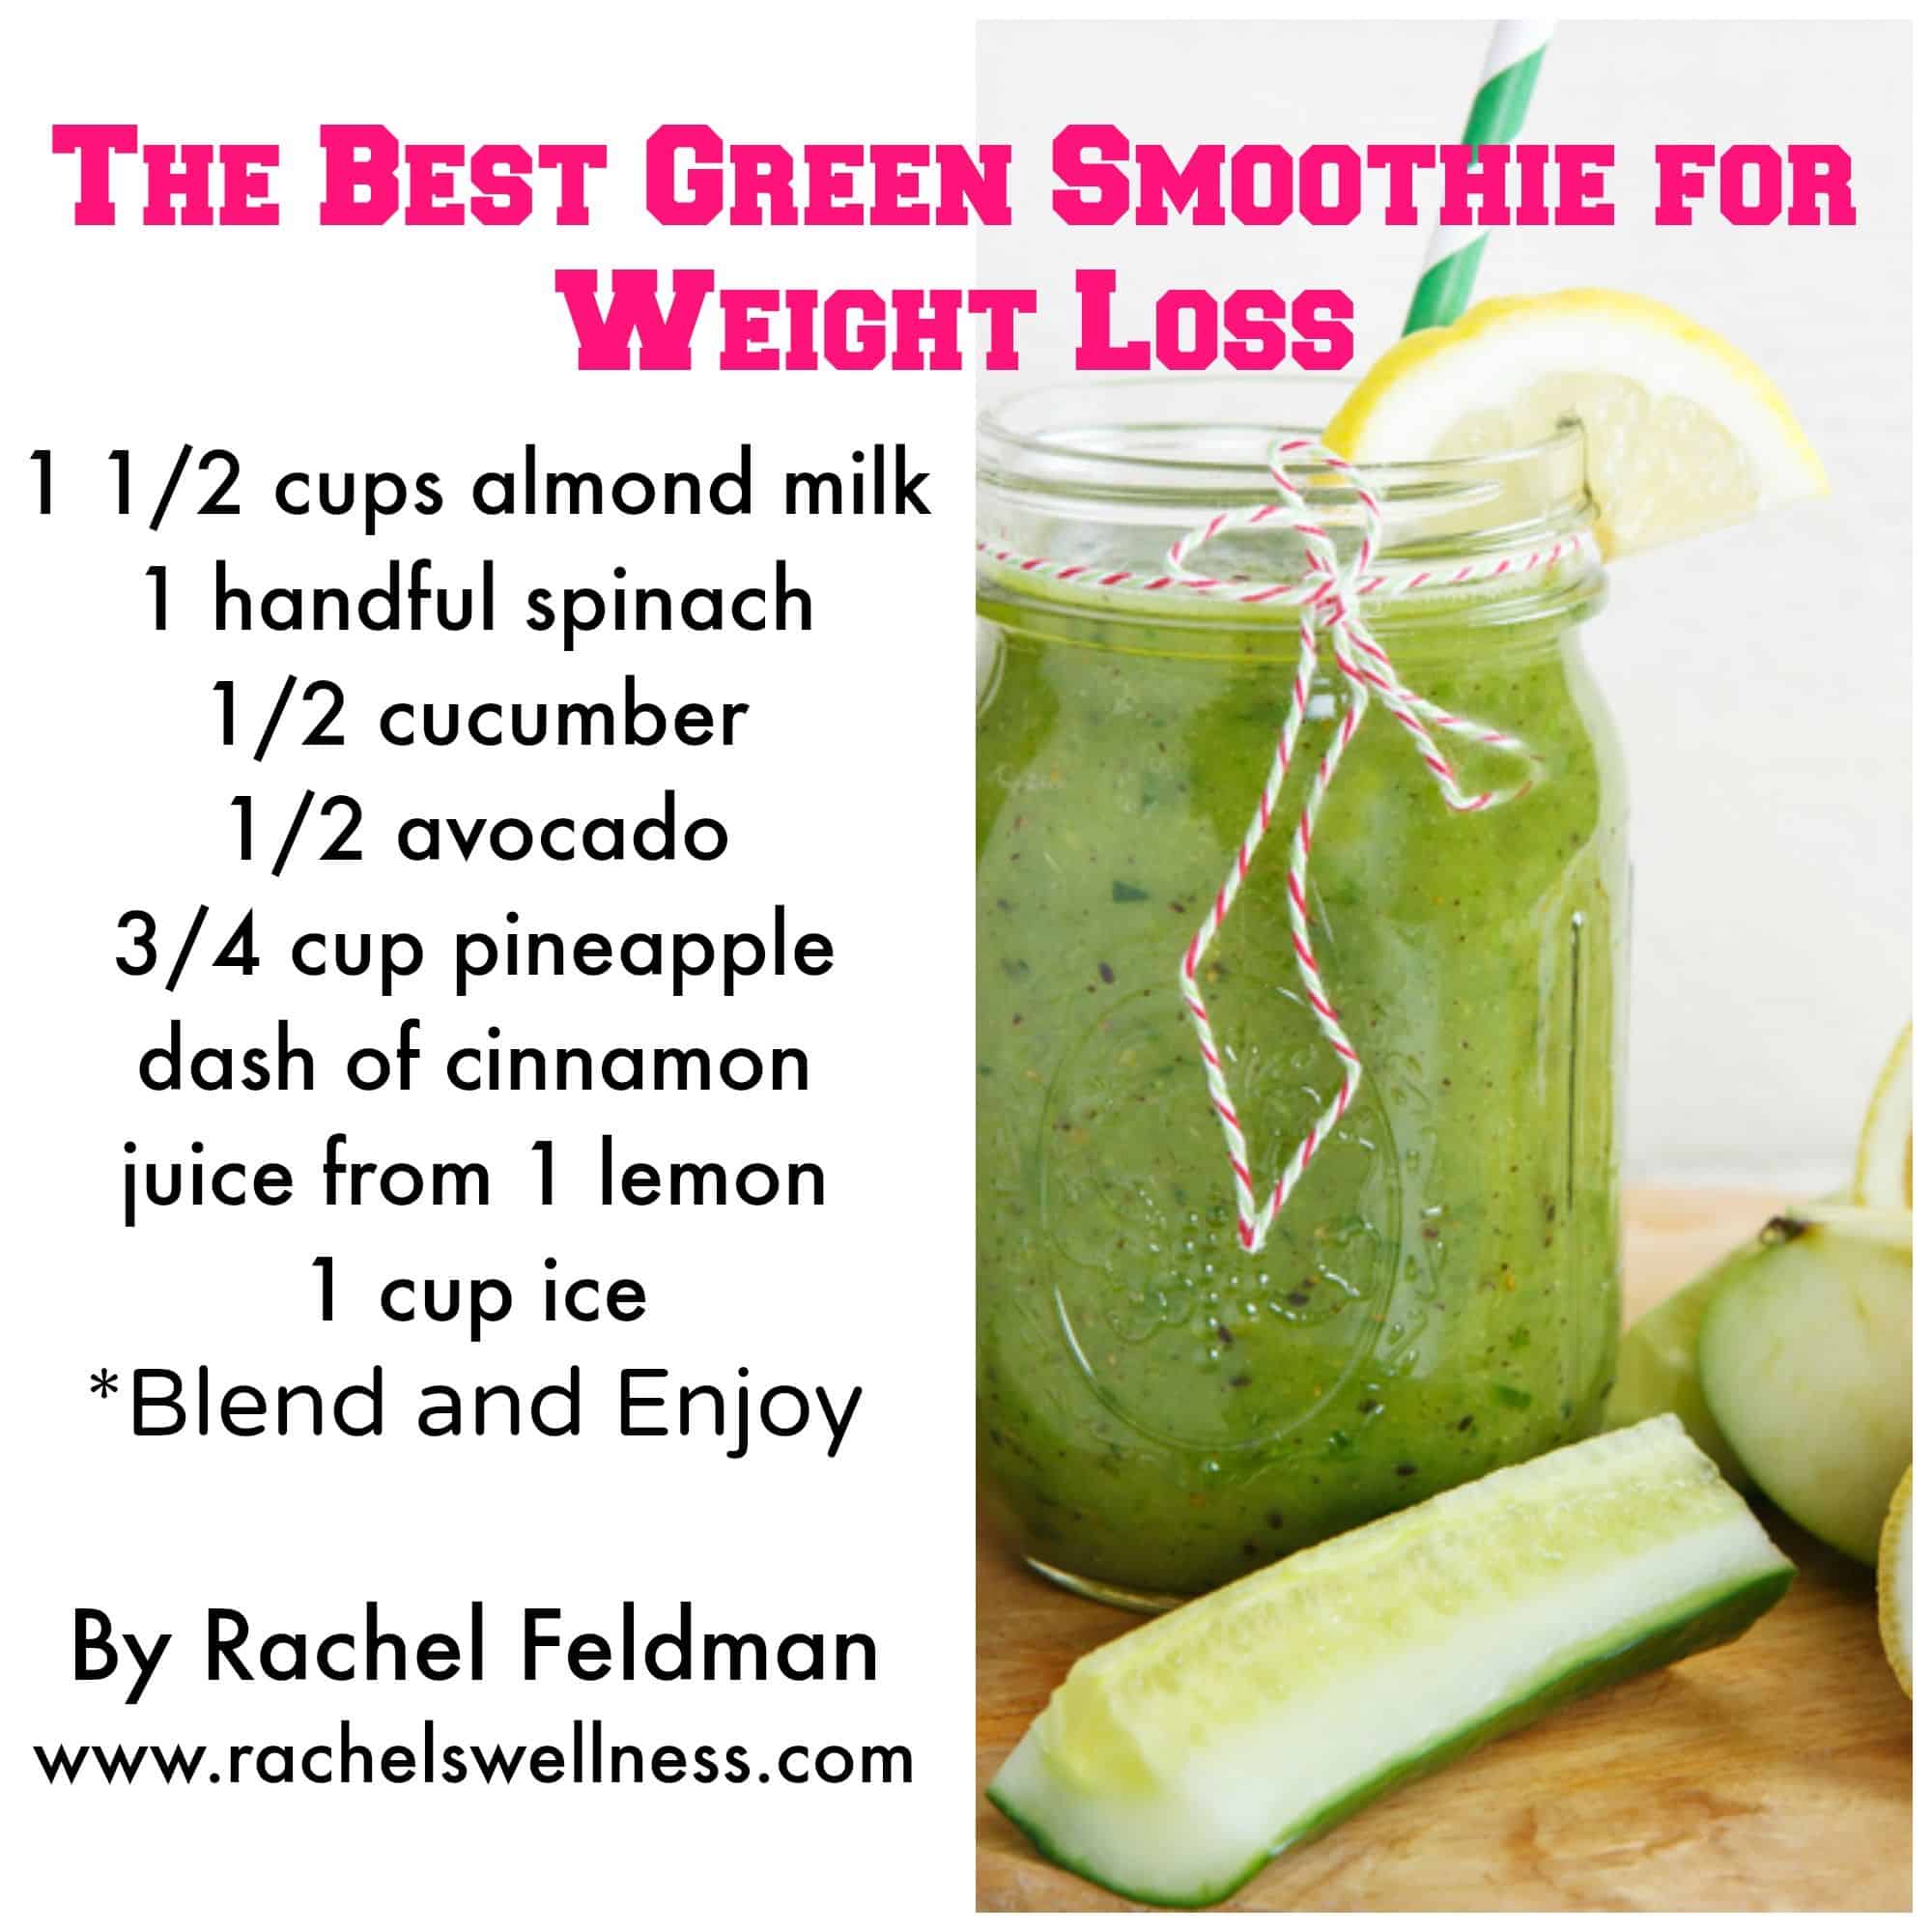 How To Make Smoothies For Weight Loss